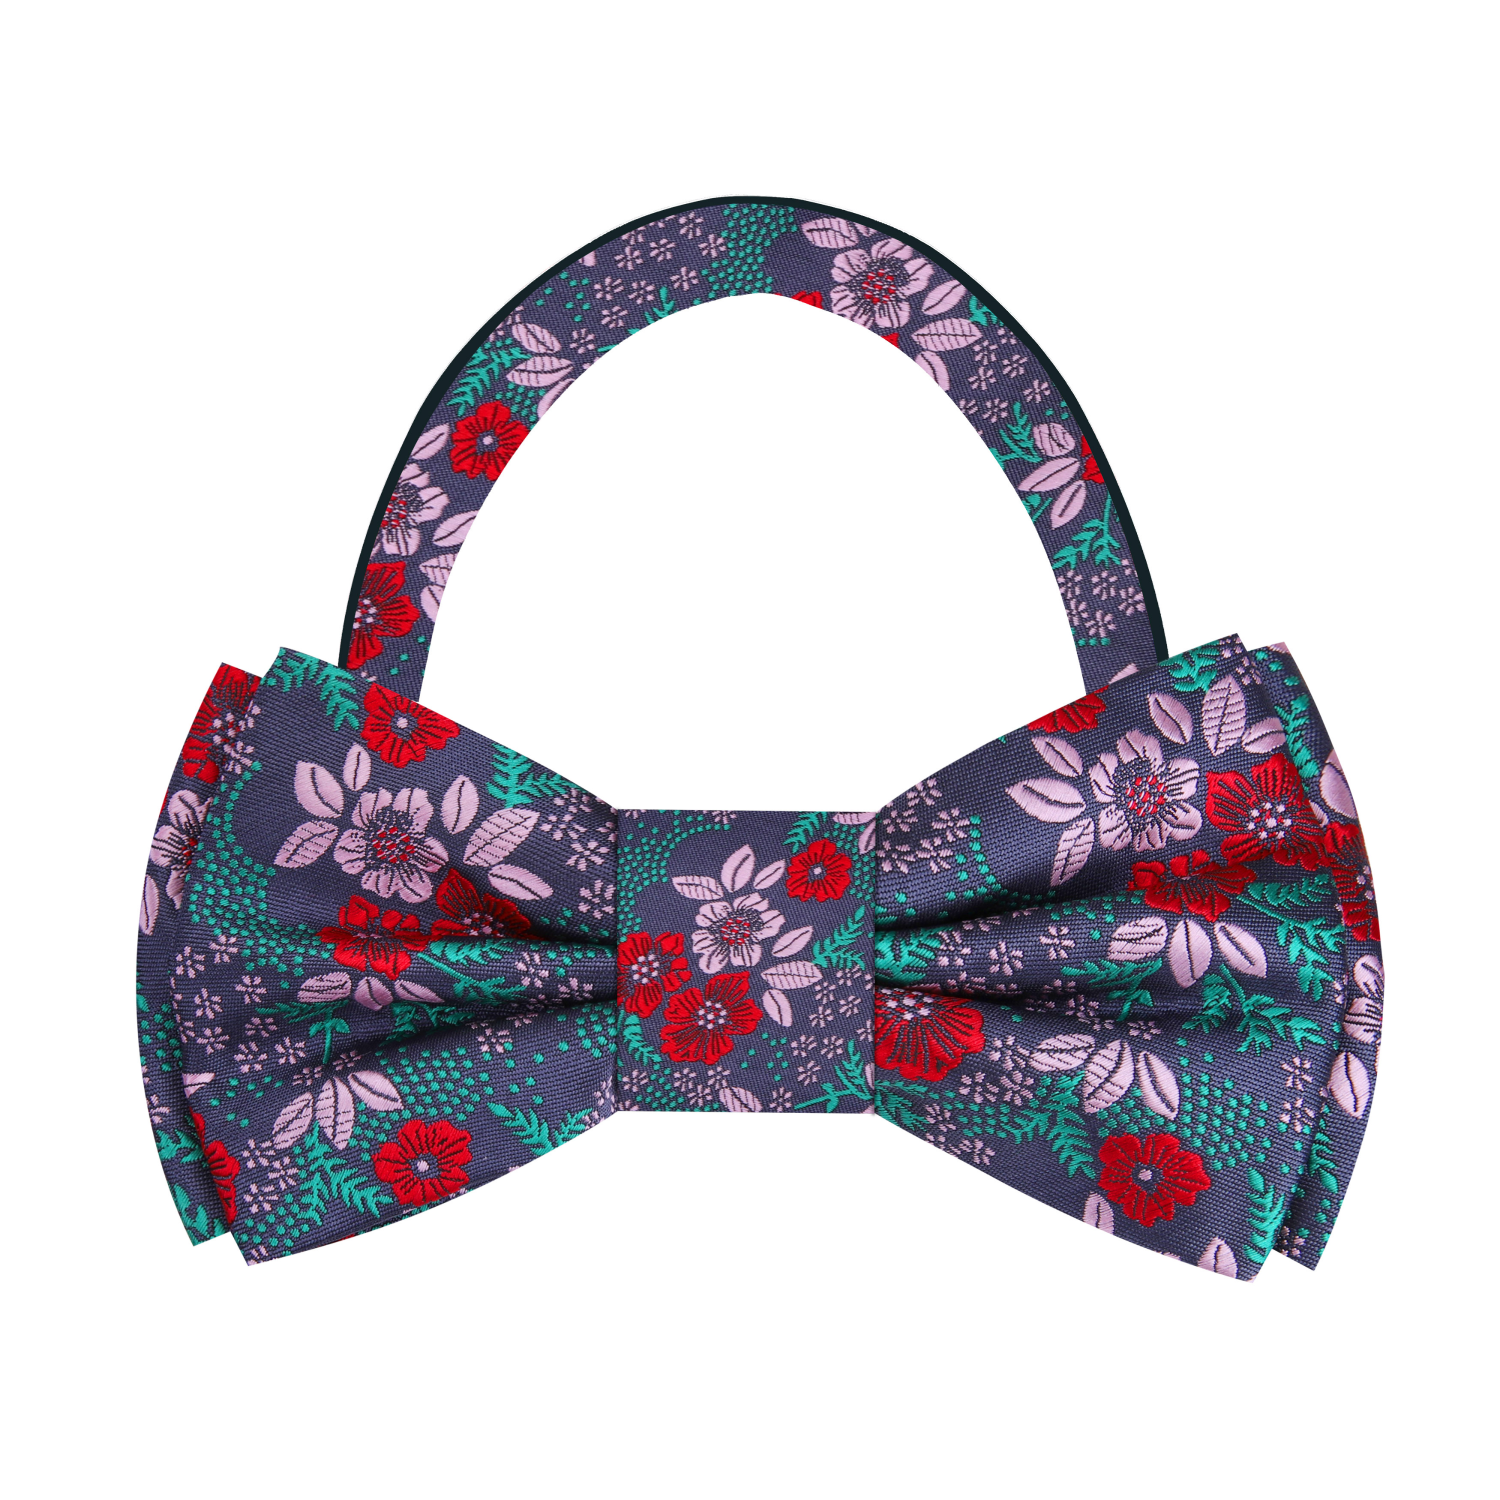 Light Plum, Red, Green, Pink Floral Bow Tie Pre Tied